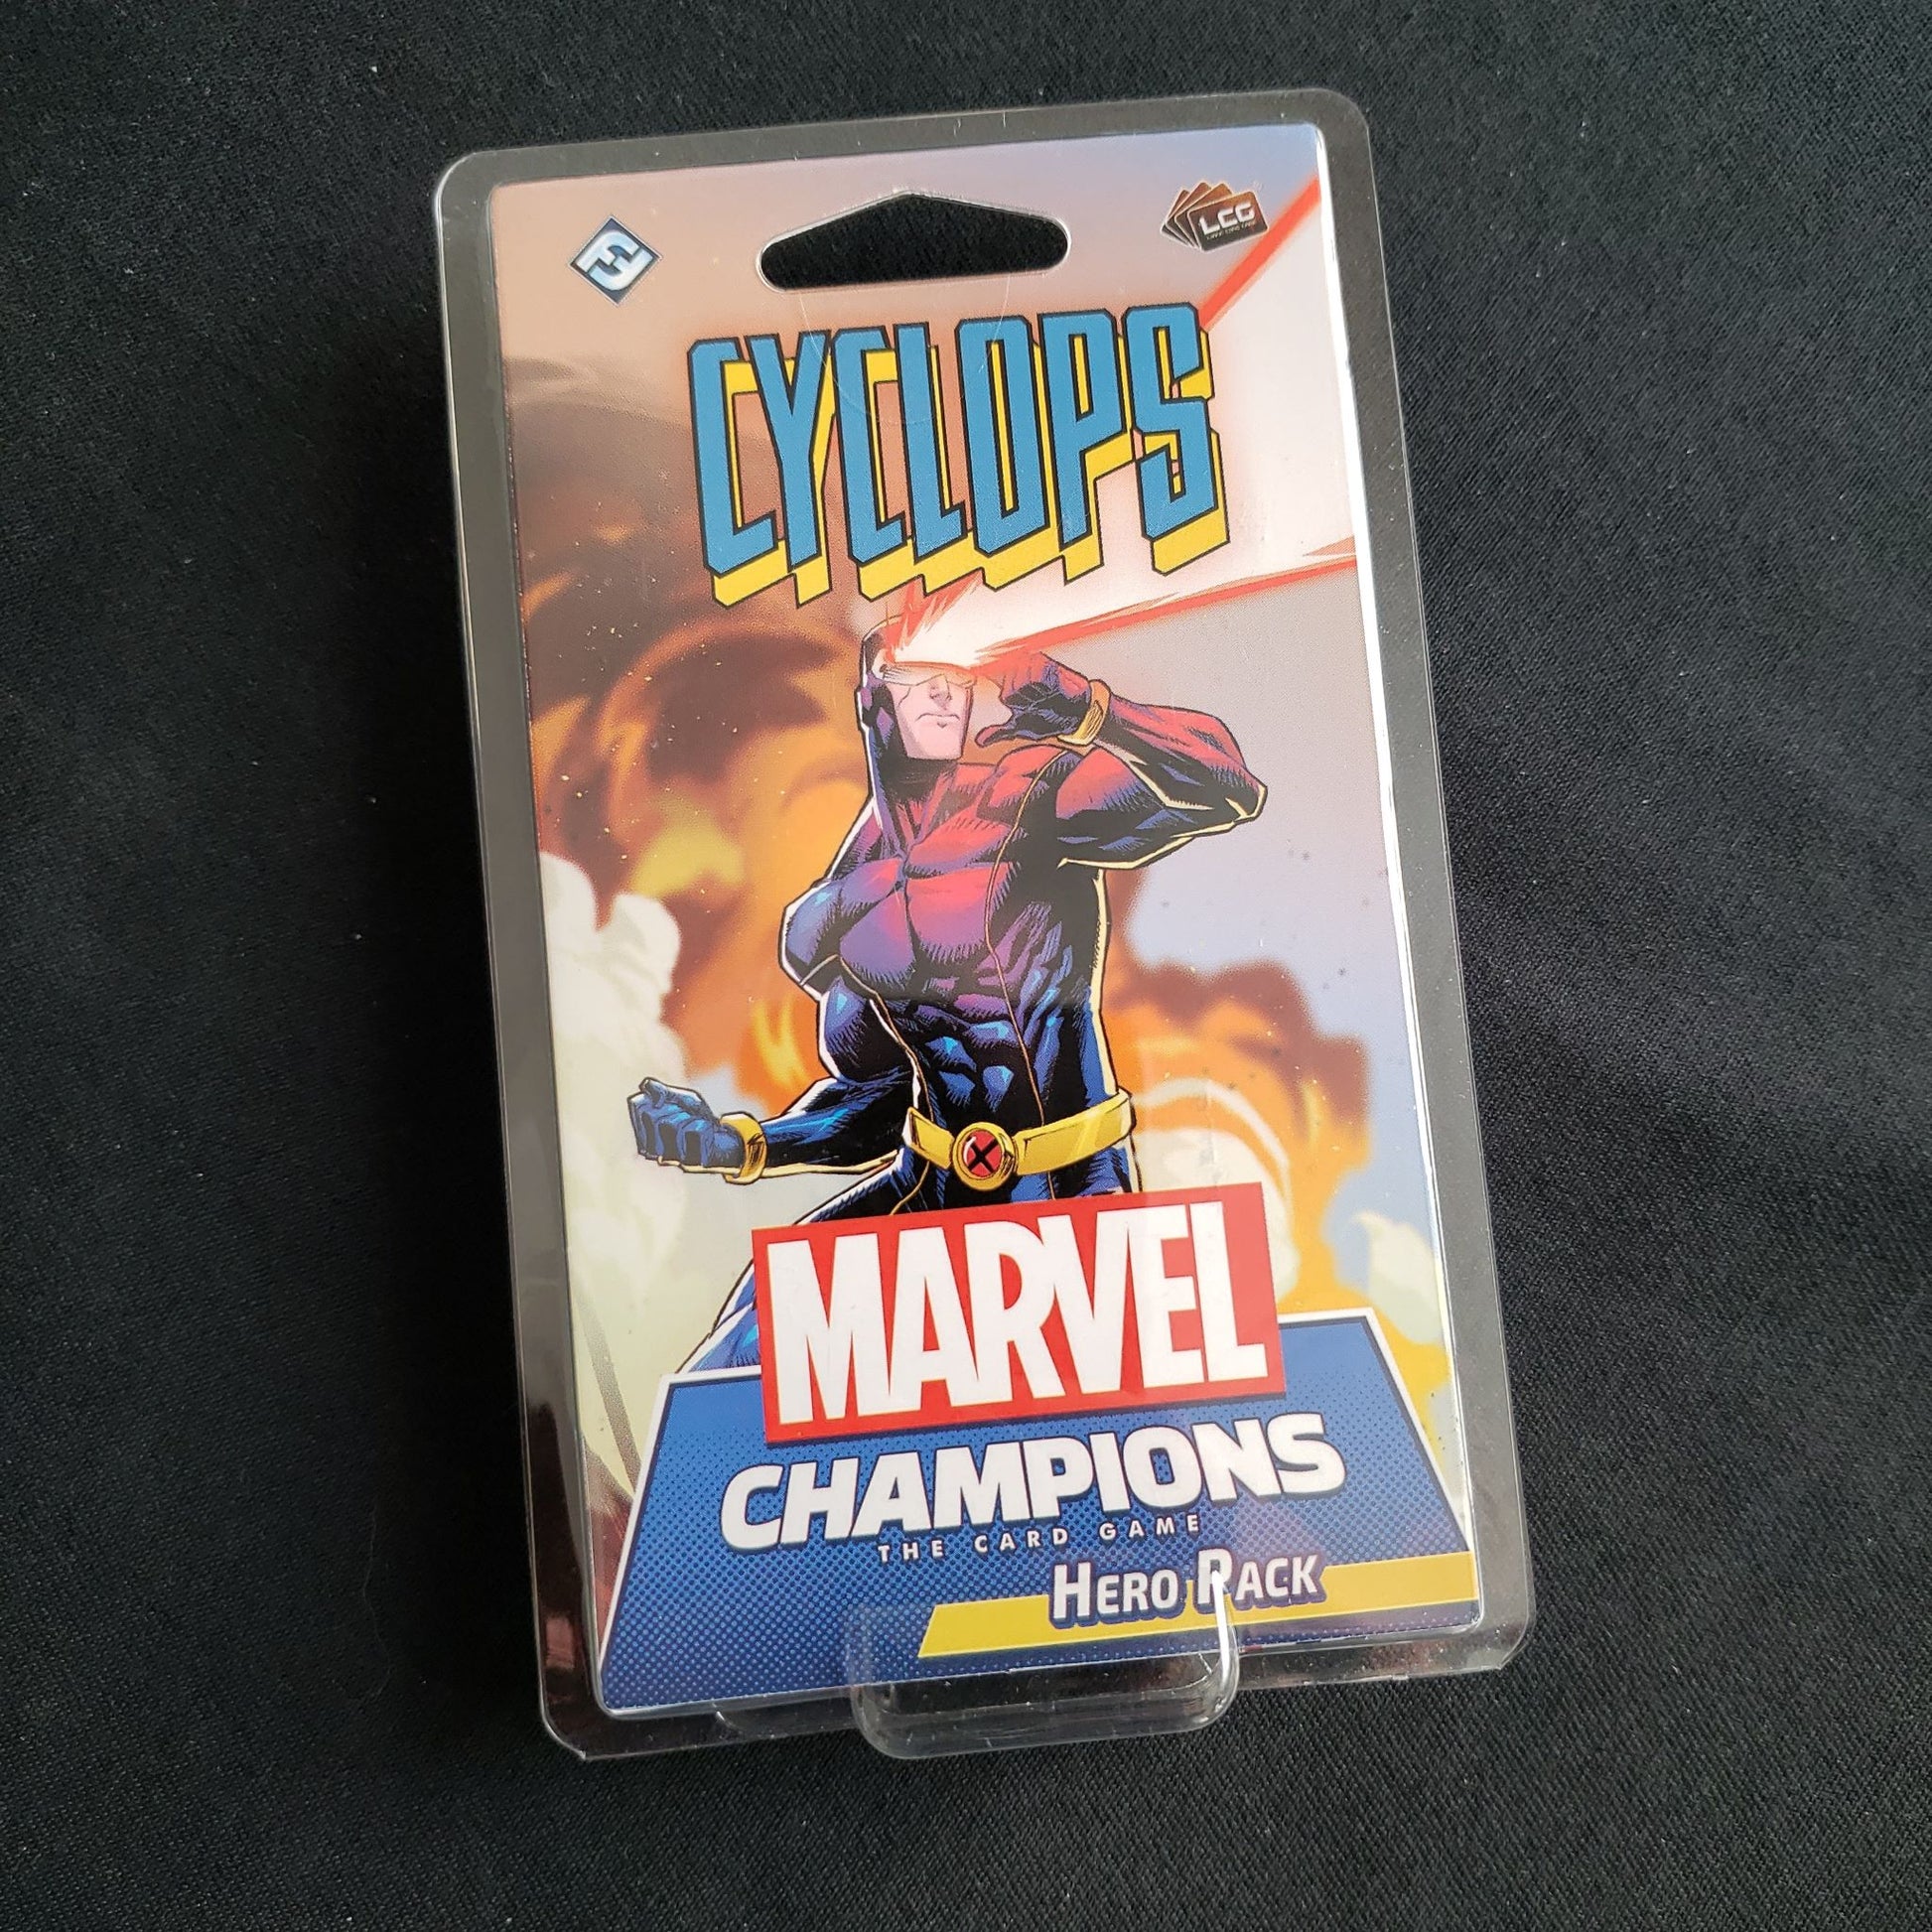 Image shows the front of the package for the Cyclops Hero Pack for the Marvel Champions card game